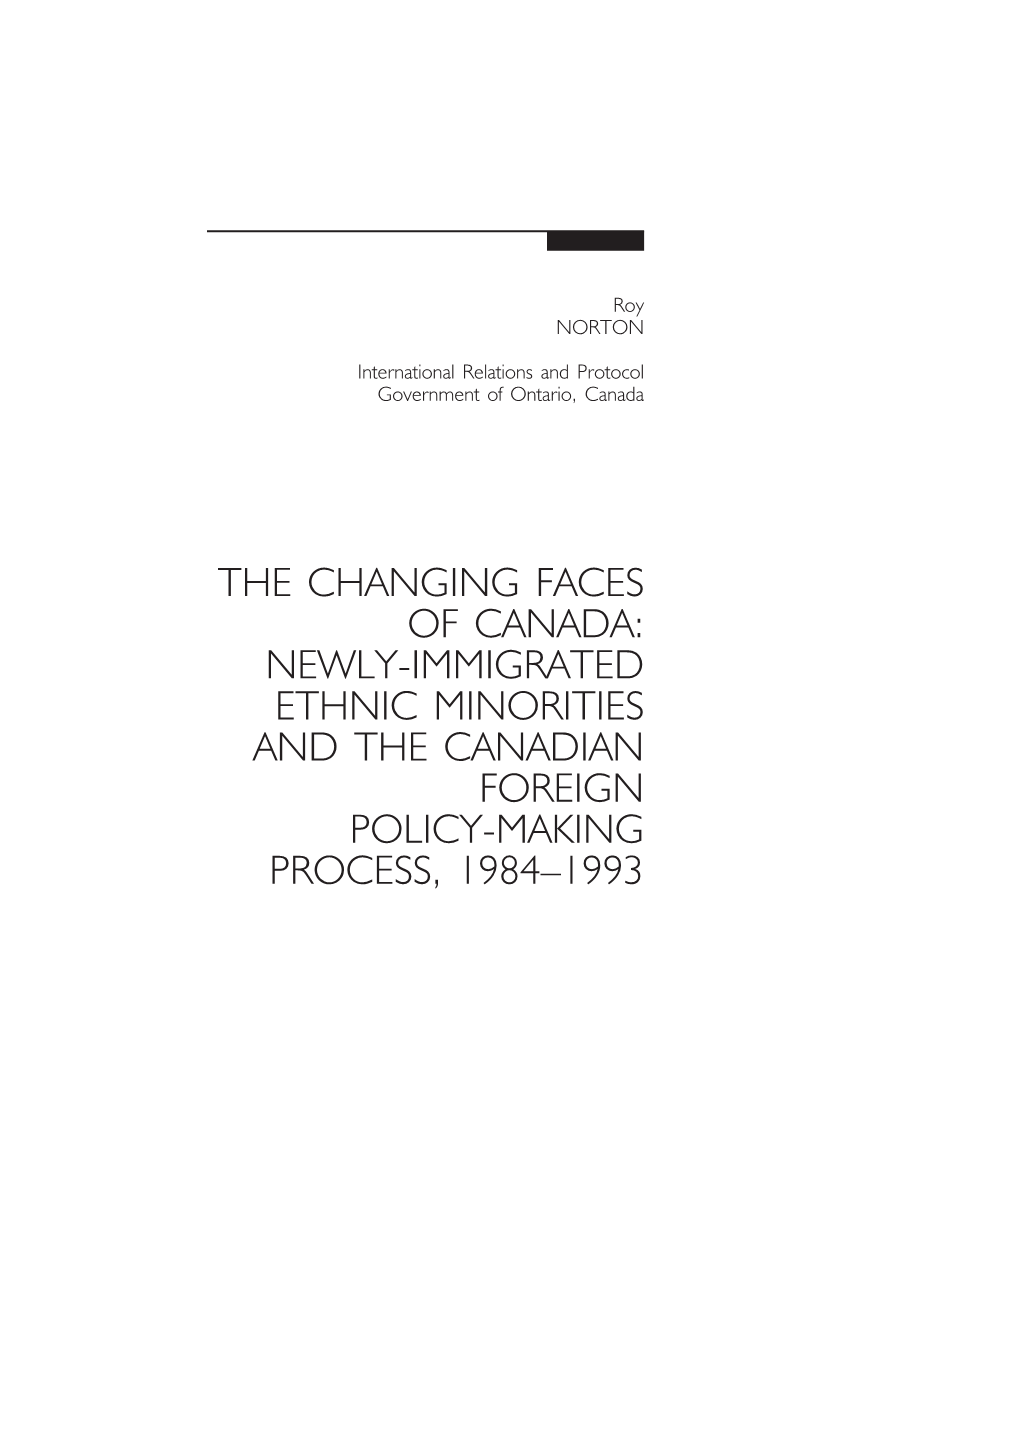 The Changing Faces of Canada: Newly-Immigrated Ethnic Minorities and the Canadian Foreign Policy-Making Process, 1984–1993